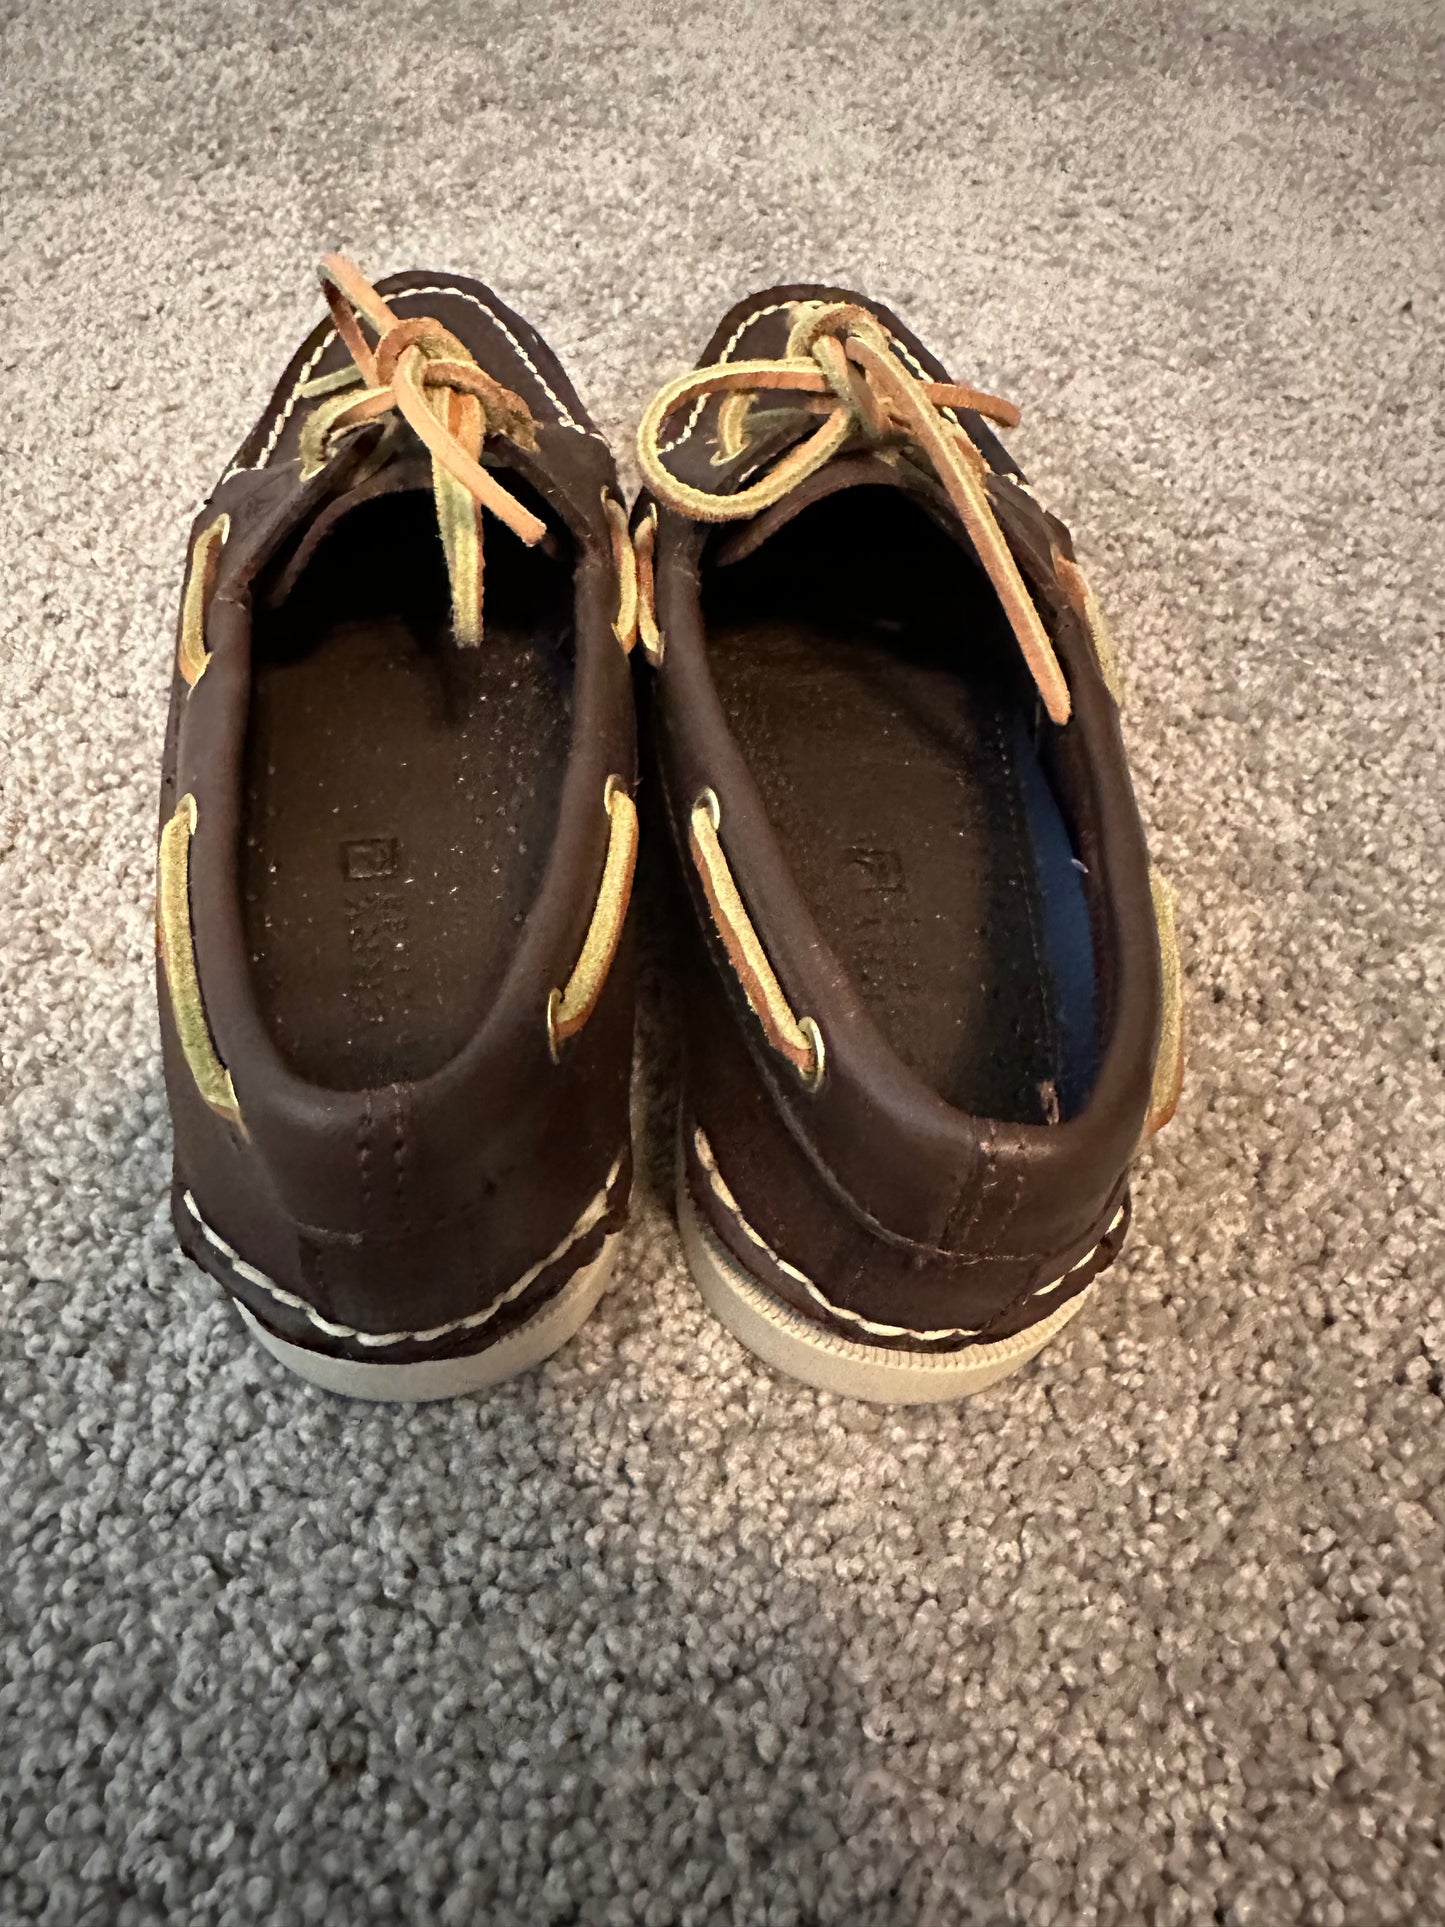 Brown Sperry size 6.5